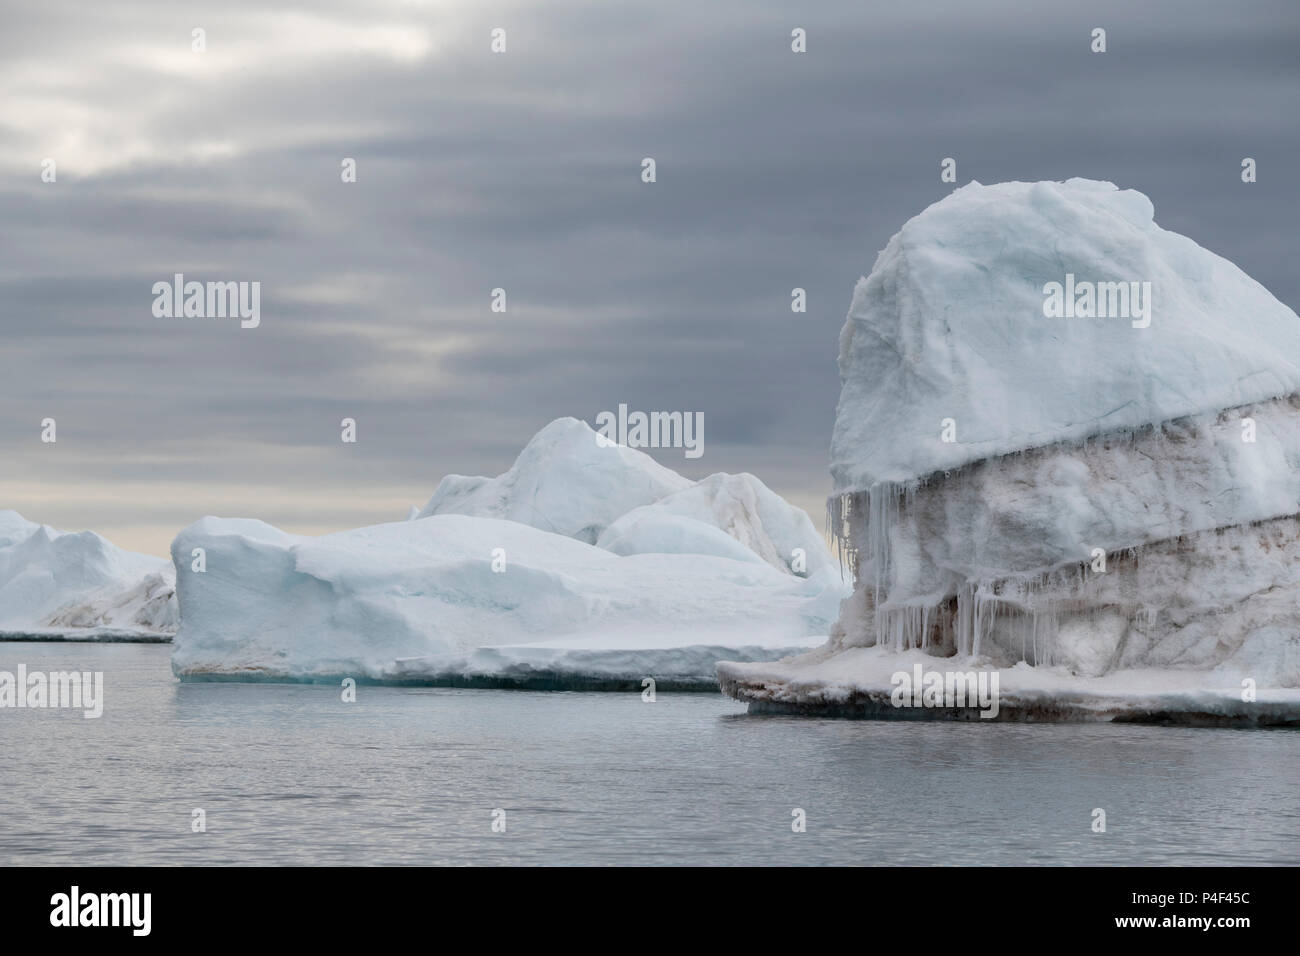 Norway, Svalbard, Nordaustlandet, Austfonna. Large iceburgs in the bay in front of icecap. Stock Photo